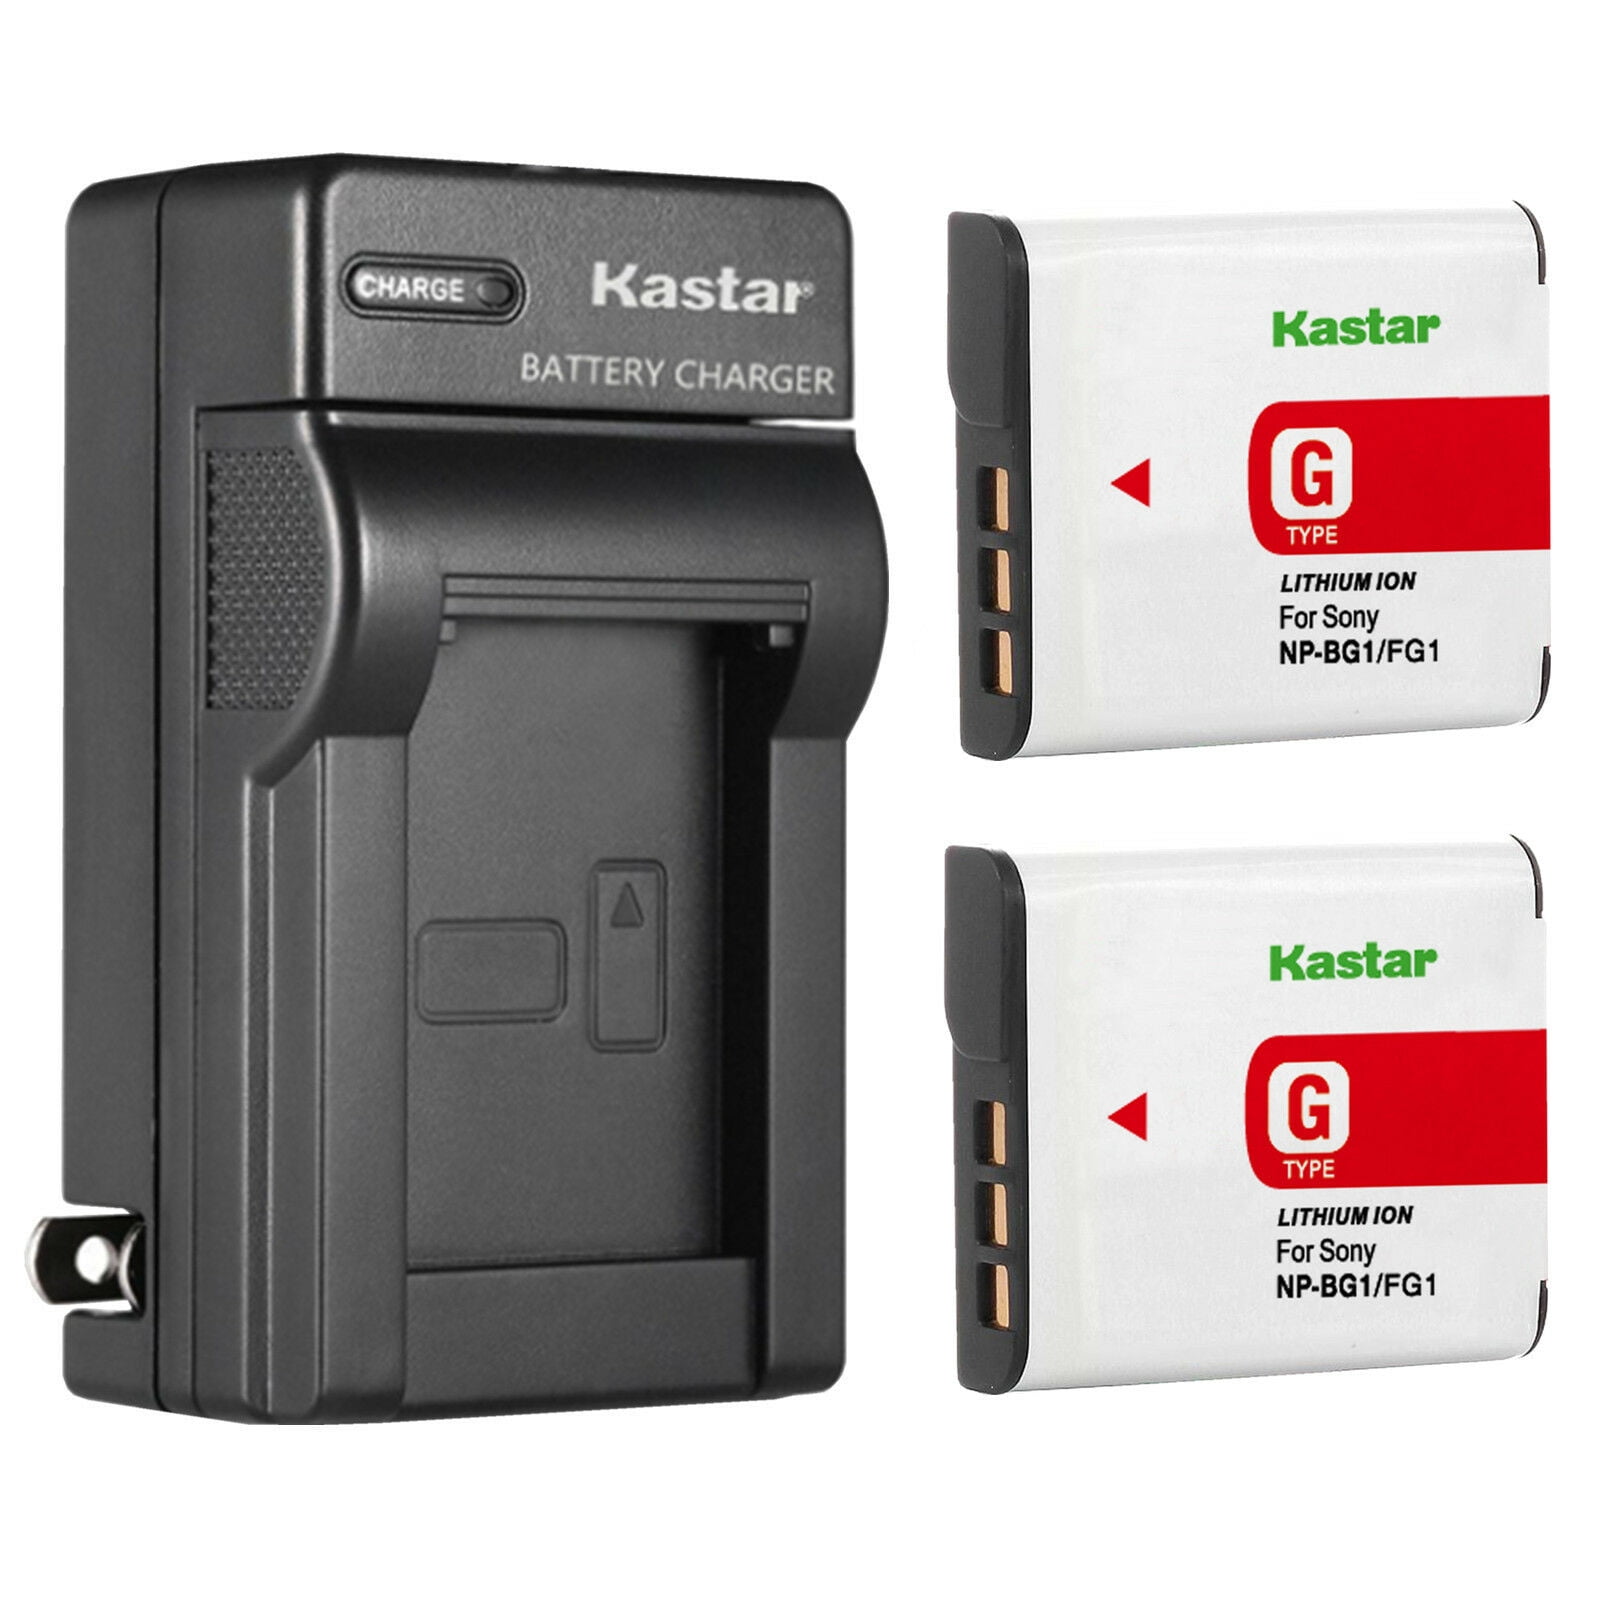 Kastar NP-BG1 Battery Cyber-Shot DSC-W120 1-Pack Cyber-Shot DSC-W170 and Charger Kit for Sony NP-FG1 Cyber-Shot DSC-W300 Digital Cameras BC-CSG and Sony Cyber-Shot DSC-H50 Cyber-Shot DSC-H10 